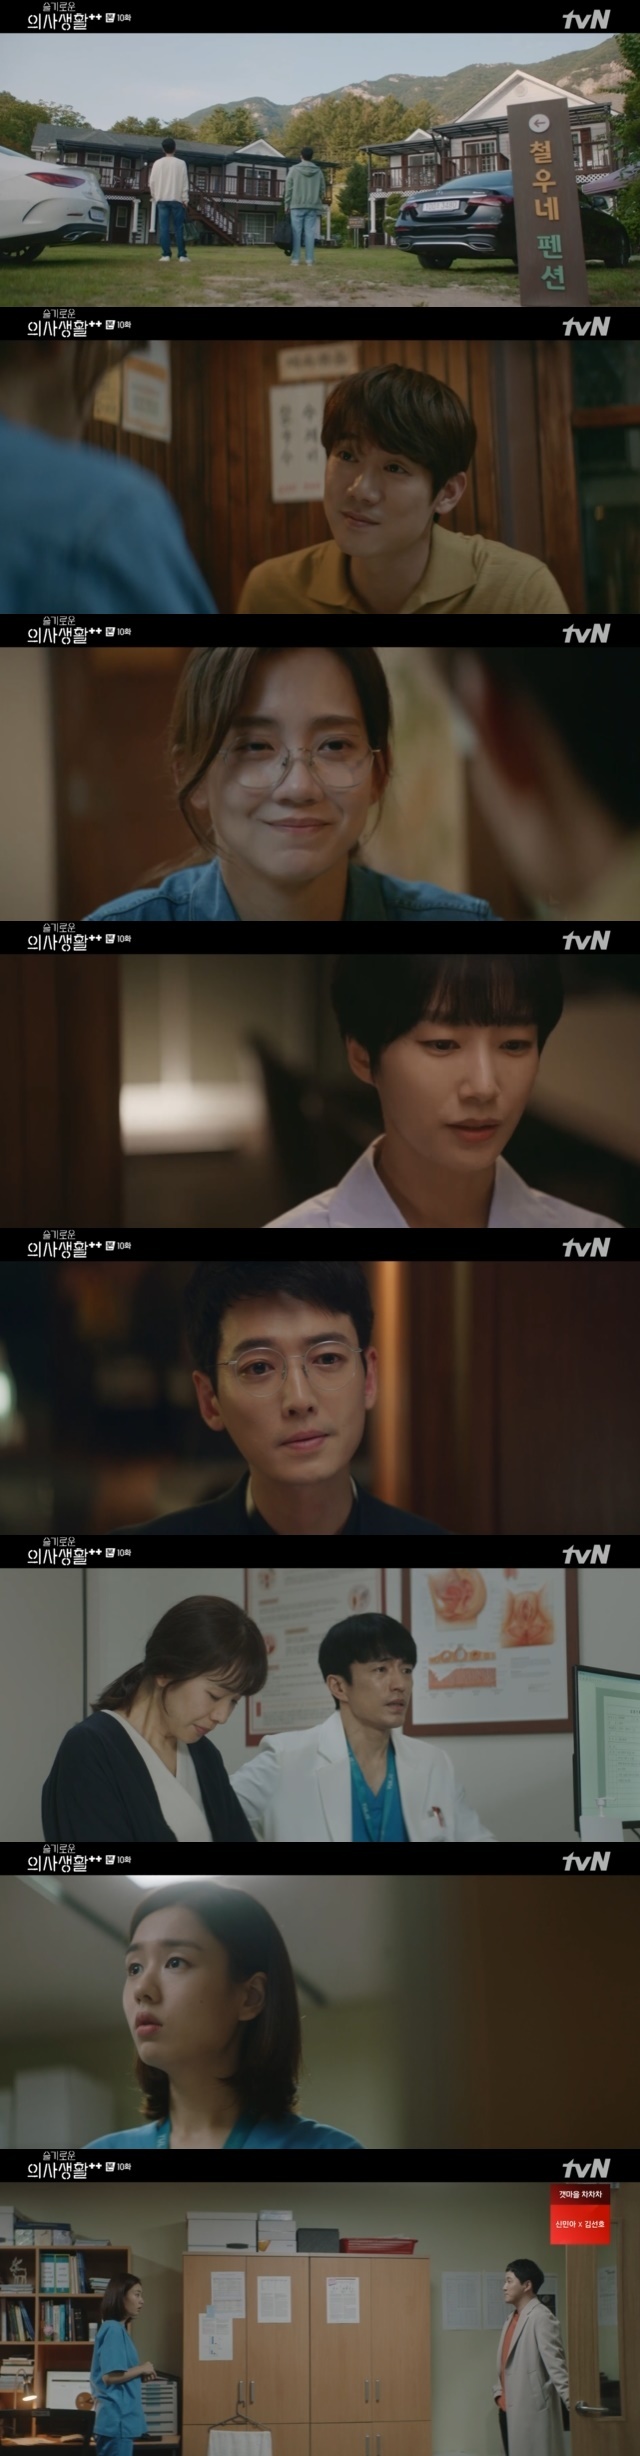 Kim Dae-myung asked Ahn Eun-jin for a date, but the United States of America was hinted at.In the 10th episode of TVN Mokyo Drama Spicy Doctor Life Season 2 (playplayplayed by Lee Woo-jung, directed by Shin Won-ho), which was broadcast on August 26, 99z, who promised to travel to Searaksan during a busy day, was portrayed.On the day of the show, it was revealed that the name of the band of 99z was Gongnyong Ridge by Bong Kwang-hyun (Choi Young-joon).Ahn Jung-won (Yoo Yeon-seok) is a club that he likes mountain climbing and likes Gongnyong Ridge.However, Bong Kwang-hyun said, They have never been there. I will go to the entrance this time. It is not their band club, but a wild bibimbap club.In fact, 99s were struggling as a group because Seoraksan did not want to climb, unlike the one that started as a climbing club.To persuade them, Ahn said, The name of the band is Gongnyong Ridge, but I should go climbing once. It is a very easy course there.My sister Kang Kang went up in a skirt. The rest of the 99s refuted, I am looking at the mountain. Still, they prepared a trip by booking high-speed buses.Chu Min-ha (Ahn Eun-jin) was troubled by the last remaining Confessions opportunity.I think I will succeed unconditionally this time, he told cheering Jang Winter (Shin Hyun-bin) I think I will try to overdo it. Its the last step.And the last Confessions I want to do not do in the hospital, I want to be in order, not this. On this day, I met Kim Dae-myung with a rugged look as I wrapped my head with a soap that was chewing, and I cared about it.The family history of the winter was also revealed. The younger brother, Jang Ga-eul, who visited the hospital and reported the divorce with the woman Friend, mentioned his father for the reason of the divorce.I told you that the person who will be my father-in-law hit the person who will be my mother-in-law, fractured the nose, broken the ribs, and left the eardrums.So I am in a cell now. The words of the winter made me guess what I could not tell Ahn Jung-won.The relationship between Yang Seok-hyung and Chu Min-ha was perceived to be at stake.Cho Young-hye (Moon Hee-kyung) informed Jeongrosa (Kim Hae-sook) and Joo Jong-soo (Kim Kap-soo) of his son Yang Seok-hyungs United States of America.She said, I think Seok did not talk to Friends. I had a training opportunity and applied for United States of America.Do Jae-hak (Jeong Mun-seong)s wife collapsed from acute enteritis, and in the process she learned that she had become pregnant, which she had given up.At first Do Jae-haks wife, who was worried about her age, changed her mind as soon as she saw the sonar picture, but she was worried because she felt something in her chest.Lee Ik-sun sent a message to Kim Joon-wan, saying, This Sunday evening were going to Friends Wedding in Seoul.Can we do Monday evening?The pair made an appointment at 6:30 on Monday at the Stakehouse in front of the hospital, and Kim Joon-wans expression flashed a subtle excitement and smile.Meanwhile, the winter finally burst into tears in front of the stables, and she was upset because of her mother trying to go down to Gwangju for herself.The winter was a sad tear in his arms as he met the stableman after the call with his mother.On the day of the trip, 99s headed to the pension at first, but one by one at the hospitals call.So the only people who finally arrived at the pension were Yang Seok-hyung and Kim Joon-wan, and this pension was operated by Chu Min-has parents.Yang Seok-hyung gave a big smile to him through the photos of Chu Min-ha in the room.This news was later known to Chu Min-ha, and Chu Min-ha immediately called her mother and informed her that this is my hospital professor, one of whom is the person I admire the most, who looks like the bear.Chu Min-has parents then treated Yang Seok-hyung and Kim Joon-wan very much, but Chu Min-ha mistook the professor who said Kim Joon-wan and continued to laugh.One day, when it rained, Lee Ik-jun found Chae Song-hwas professors office by taking a coffee and asked Lee Ik-jun what he wanted for his birthday present not long ago.Lee Ik-jun mentioned expensive gifts such as dryers and refrigerators, but soon he said, Anything you give is good. There was a strange atmosphere between the two.Why do not you ask me, my house, why did you never ask me why my mother was hurt? Why did not you ask me what happened to my house?Answer from the stableman was waiting. So the winter was our Father domestic abuser. Since I was a kid, Ive been hitting my mother.I lost my temper and threw it at everything I could see. Father Marly broke my arm.It was hell, not home, said Confessions, who understood all this winter and said, Dont blame yourself, you can.Kim Joon-wan delayed his appointment time by one hour because of the delay in surgery on the day of his appointment with Lee Ik-sun.Kim Joon-wan, who completed the surgery safely, started running to keep his promise with Lee Ik-sun.The time Kim Joon-wan arrived was 9:45pm long after appointment but Lee Ik-sun was still waiting for him.Of course I thought the operation was delayed, Lee said to Kim Joon-wan, who asked if he should have called.Lee said, I wonder what it means to say this now, but I am really sorry that I lied and said that I was going to break up.I thought it was hard and tired for me. I hurt him because I did not want to be hurt. I was selfish. Im sorry. Apology, I still like you.So I had a picture. But this is my feelings, and I will organize it well. So you do not have to bear it. Kim Joon-wan asked, We will have a lot of things to meet by chance in the future, can you see me casually every time.I dont think I can, he said adamantly.Do Jae-haks wife had metastasized to lymph nodes in the second stage of breast cancer. She needed chemotherapy. But she was pregnant.In order to maintain her pregnancy, she had to delay chemotherapy, and she could have grown cancer.Do Jae-hak easily said, I will give up my baby, but my wife had a different idea.Do Jae-haks wife even refused chemotherapy, saying she would be treated after having a baby. Do Jae-haks wife asked Yang Seok-hyung to let her child come out healthy because I can die.However, Yang Seok-hyung said, What if the baby came out to see her mother and she did not have a mother? Where is such an irresponsible mother? There are many people who can do cancer during pregnancy.I would not have chosen it from me or the breast surgeon if it was a serious situation now. Thanks to Yang Seok-hyung, Do Jae-haks wife changed her mind and decided to have cancer three weeks later.Meanwhile, while the winter and the stable are in one place, other majors teased the ideal type of the proposal as the winter.Chae Song Hwa had his birthday present on his desk during the dinner, and Kim Joon-wan spent his daily life silently.And Yang came to Chu Min-ha first and asked, What are you doing next weekend? Do you have a promise? He asked Chu Min-ha, who wondered, Lets eat with me.Ill buy you rice, he laughed and made a heartbeat.